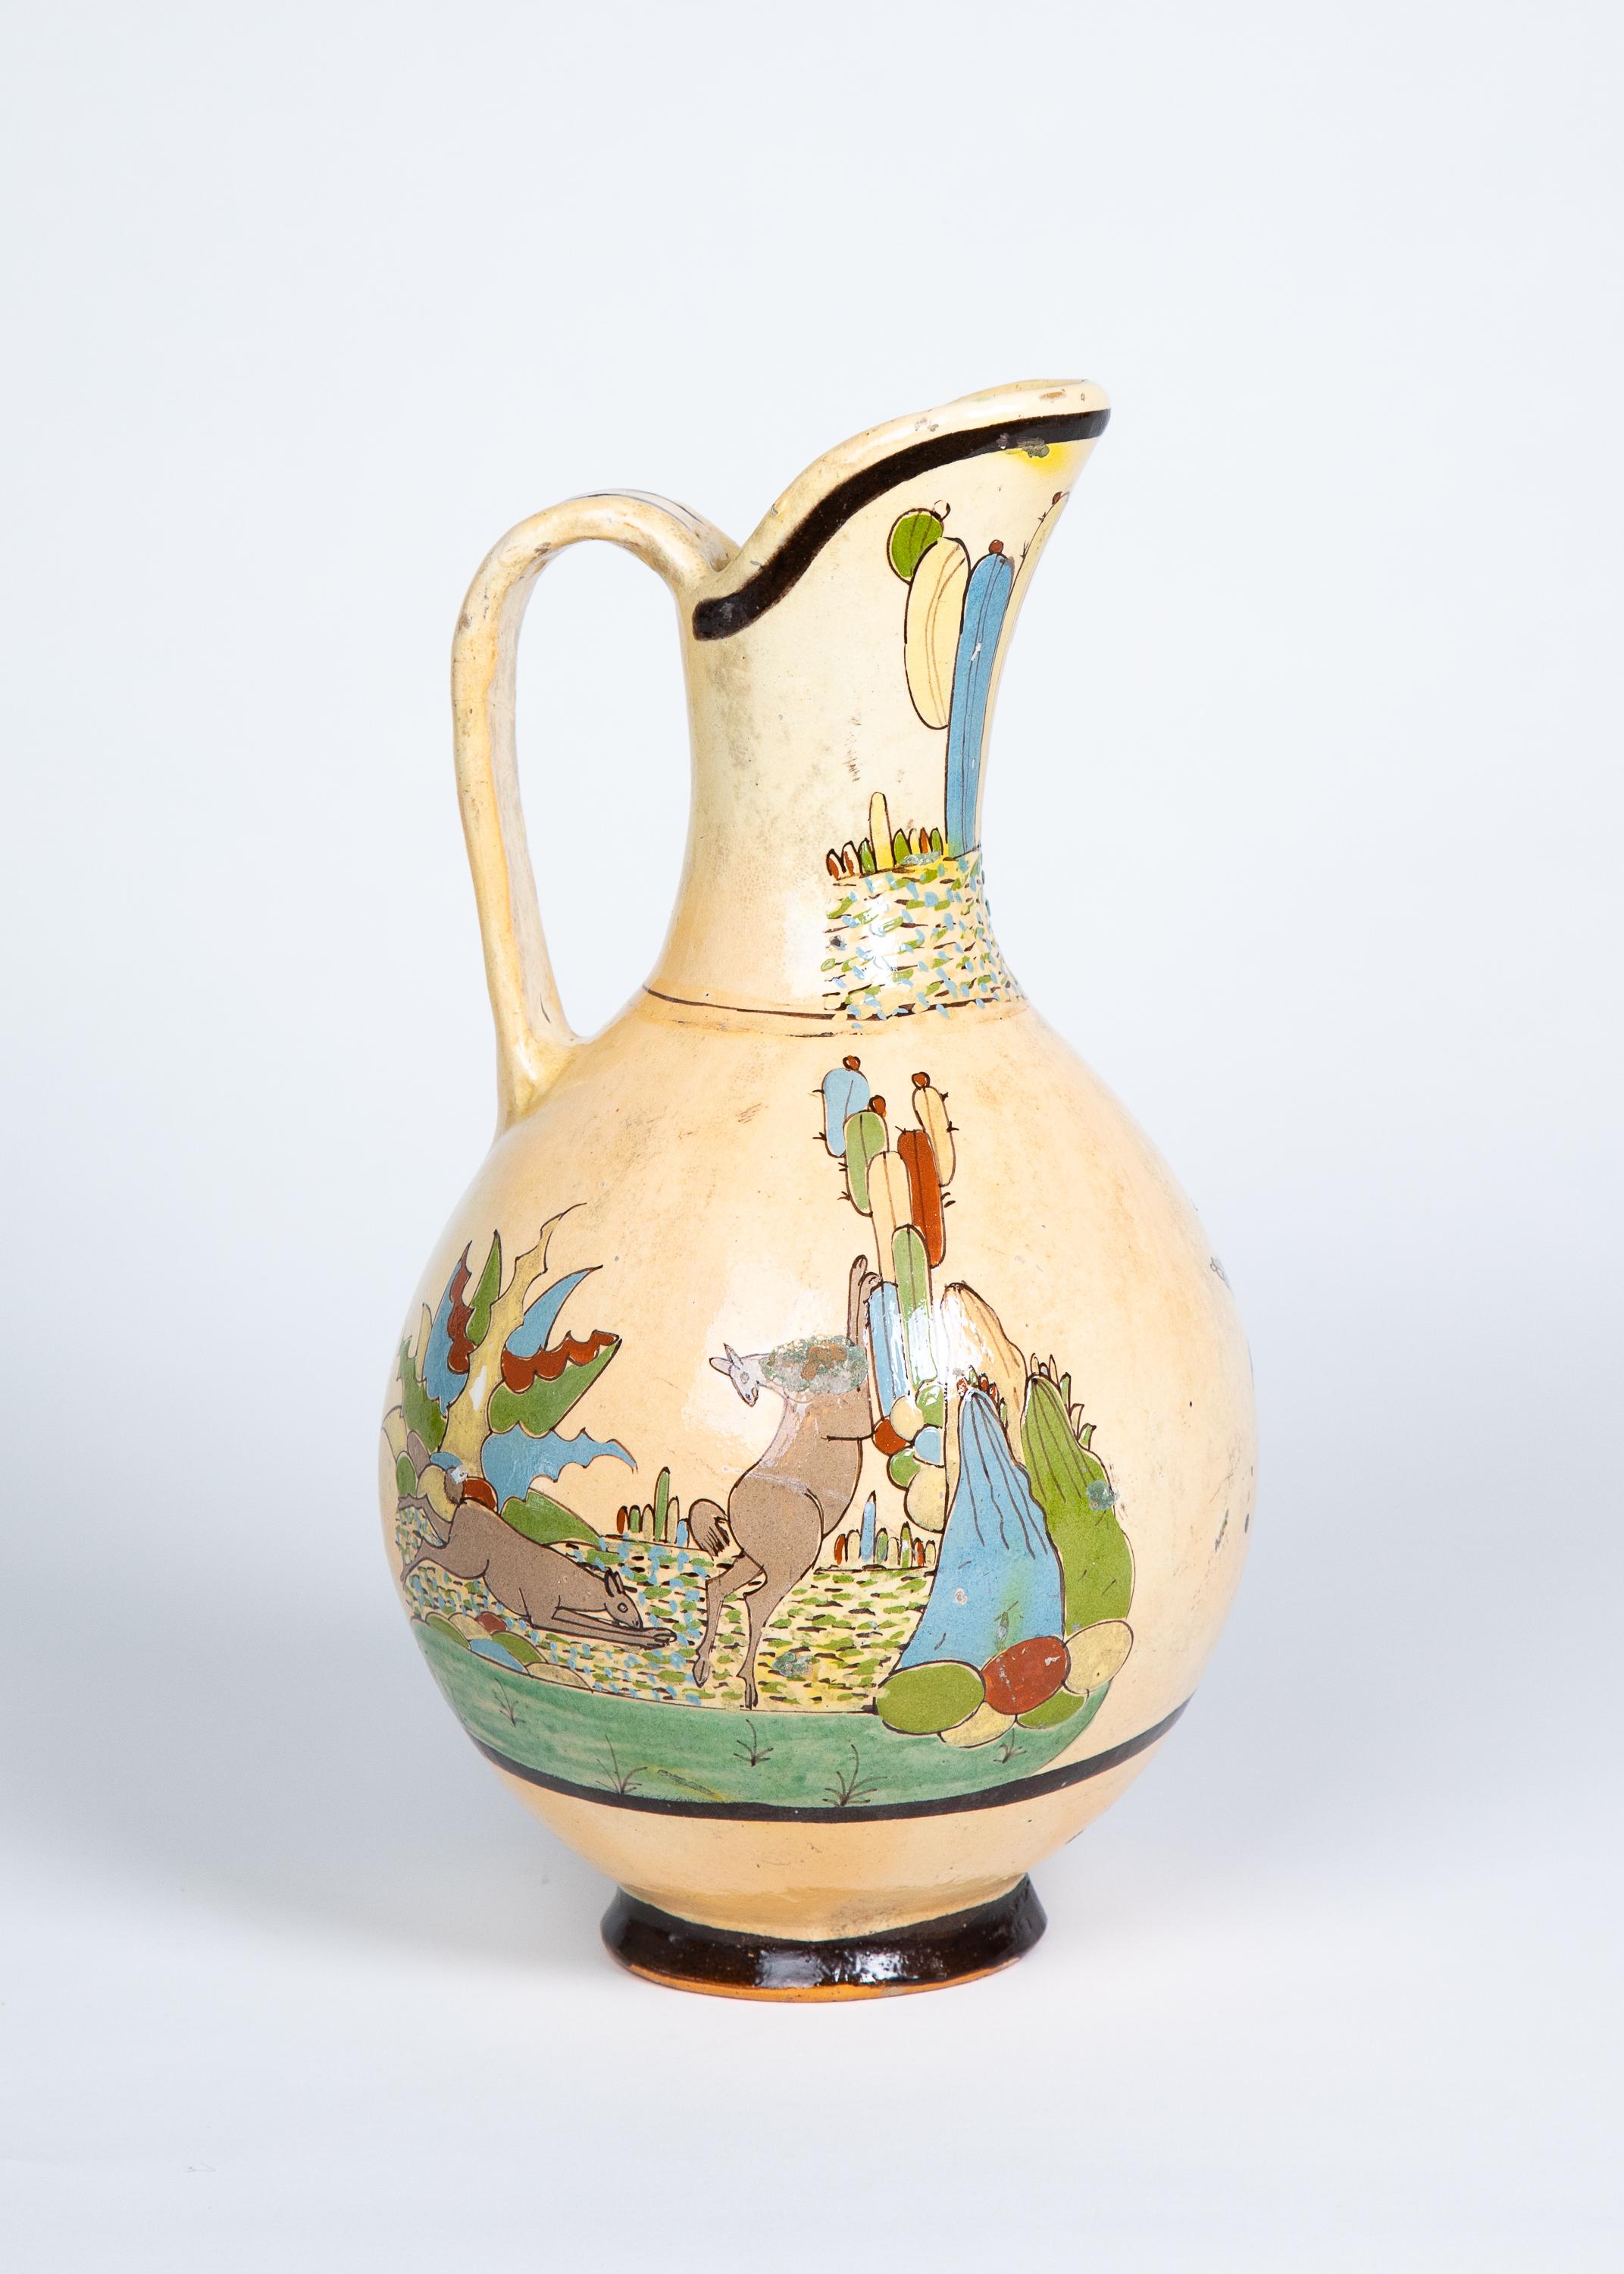 Folk Art 1950s Tlaquepaque Mexican Hand Painted Ceramic Water Pitcher